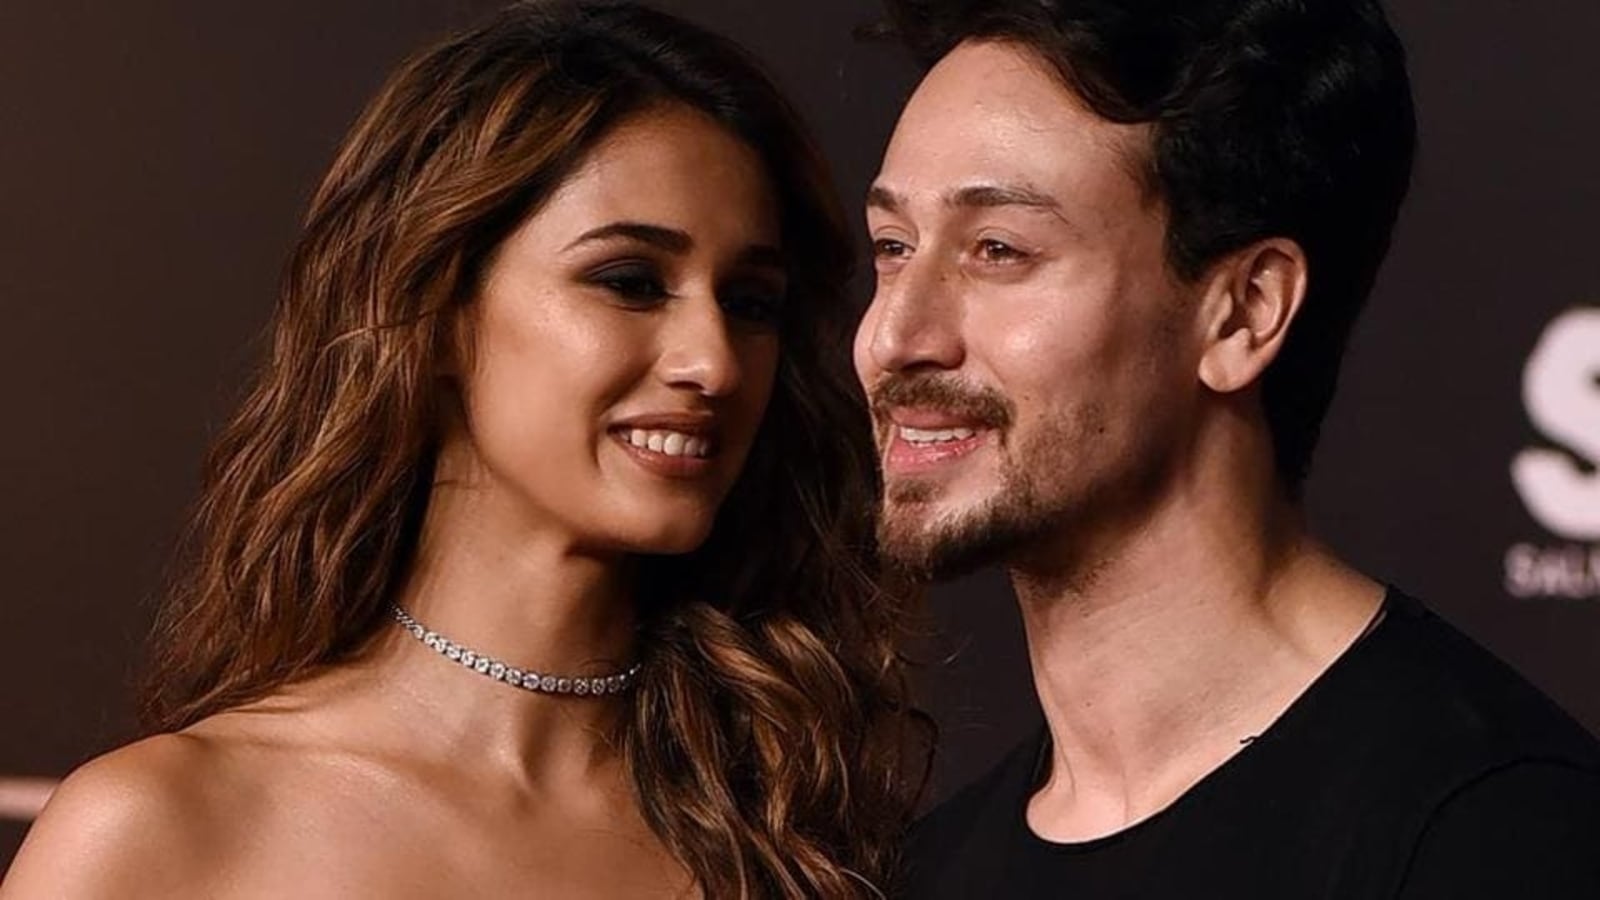 Jackie Shroff on Tiger Shroff-Disha Patani's rumoured relationship: 'My boy  started dating at the age of 25' - Hindustan Times